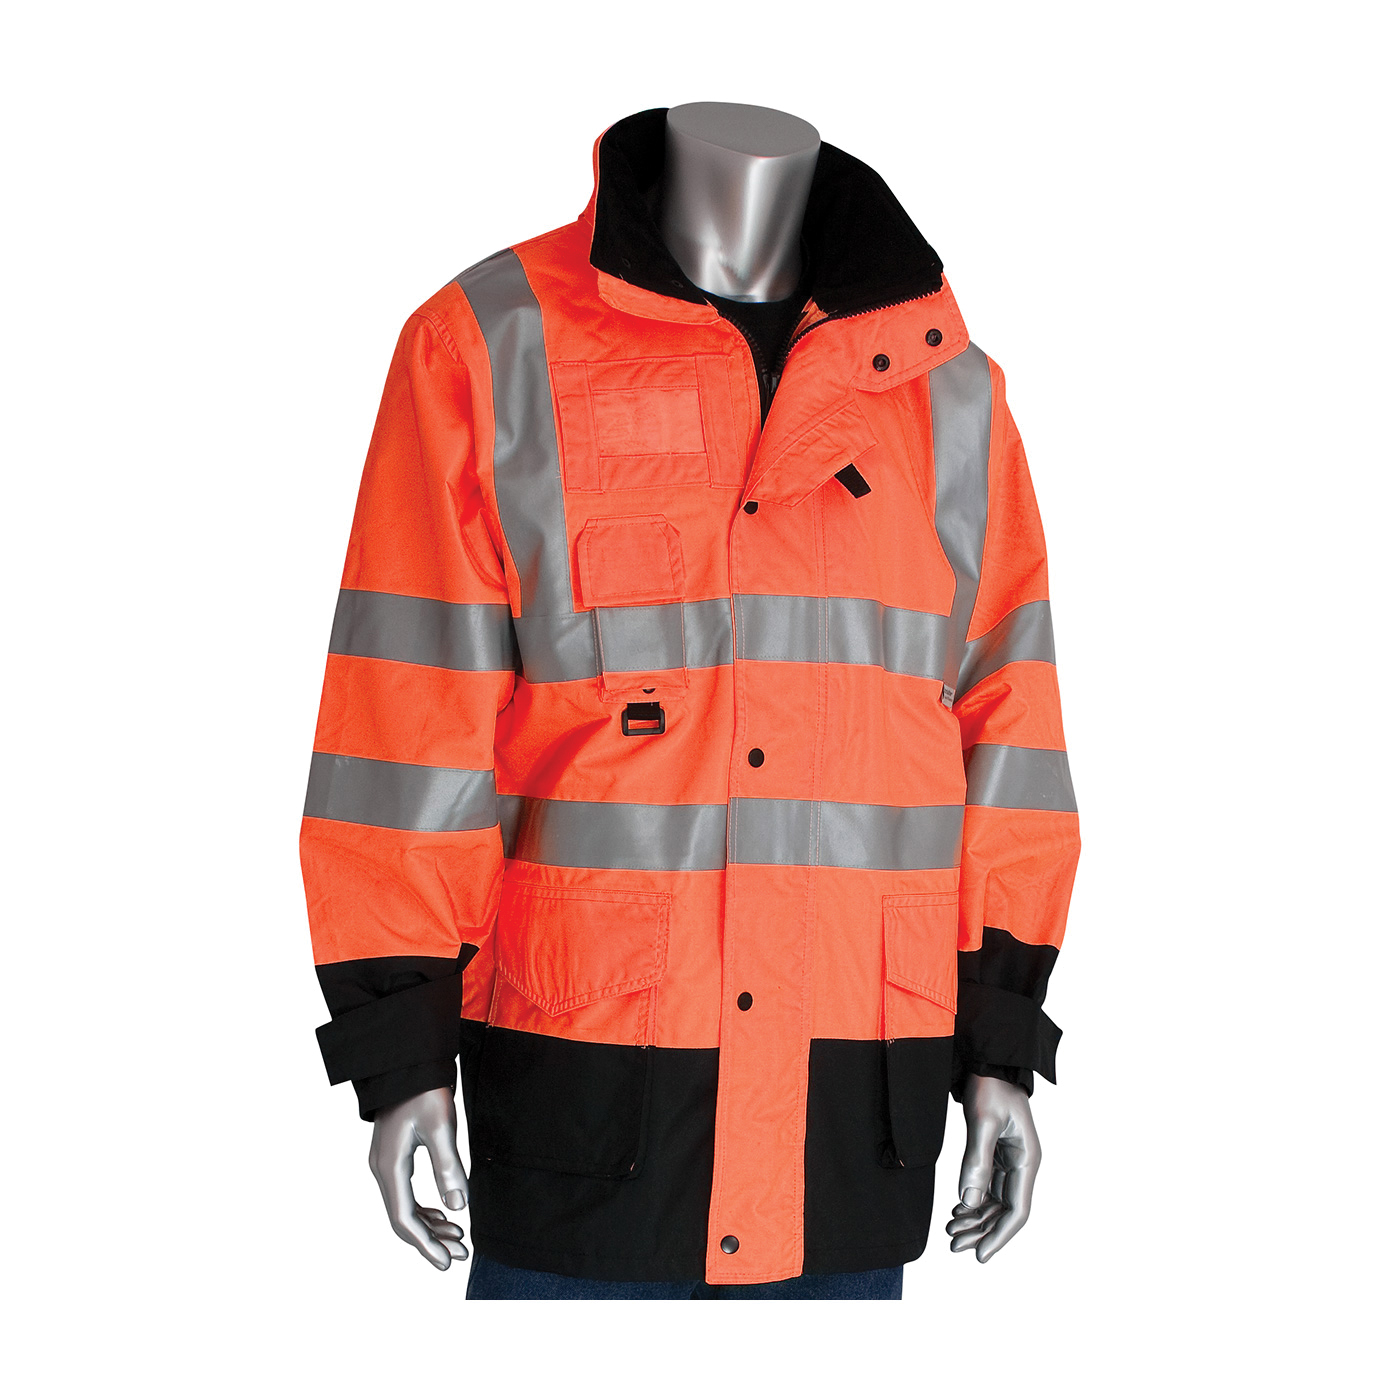 PIP® 343-1756-OR/XL 7-in-1 All Condition Winter Coat With Inner Jacket and Vest Combination, Hi-Viz Orange, Polyester, 58-1/2 in Chest, Resists: Water, Specifications Met: ANSI 107 Class 3 Type R